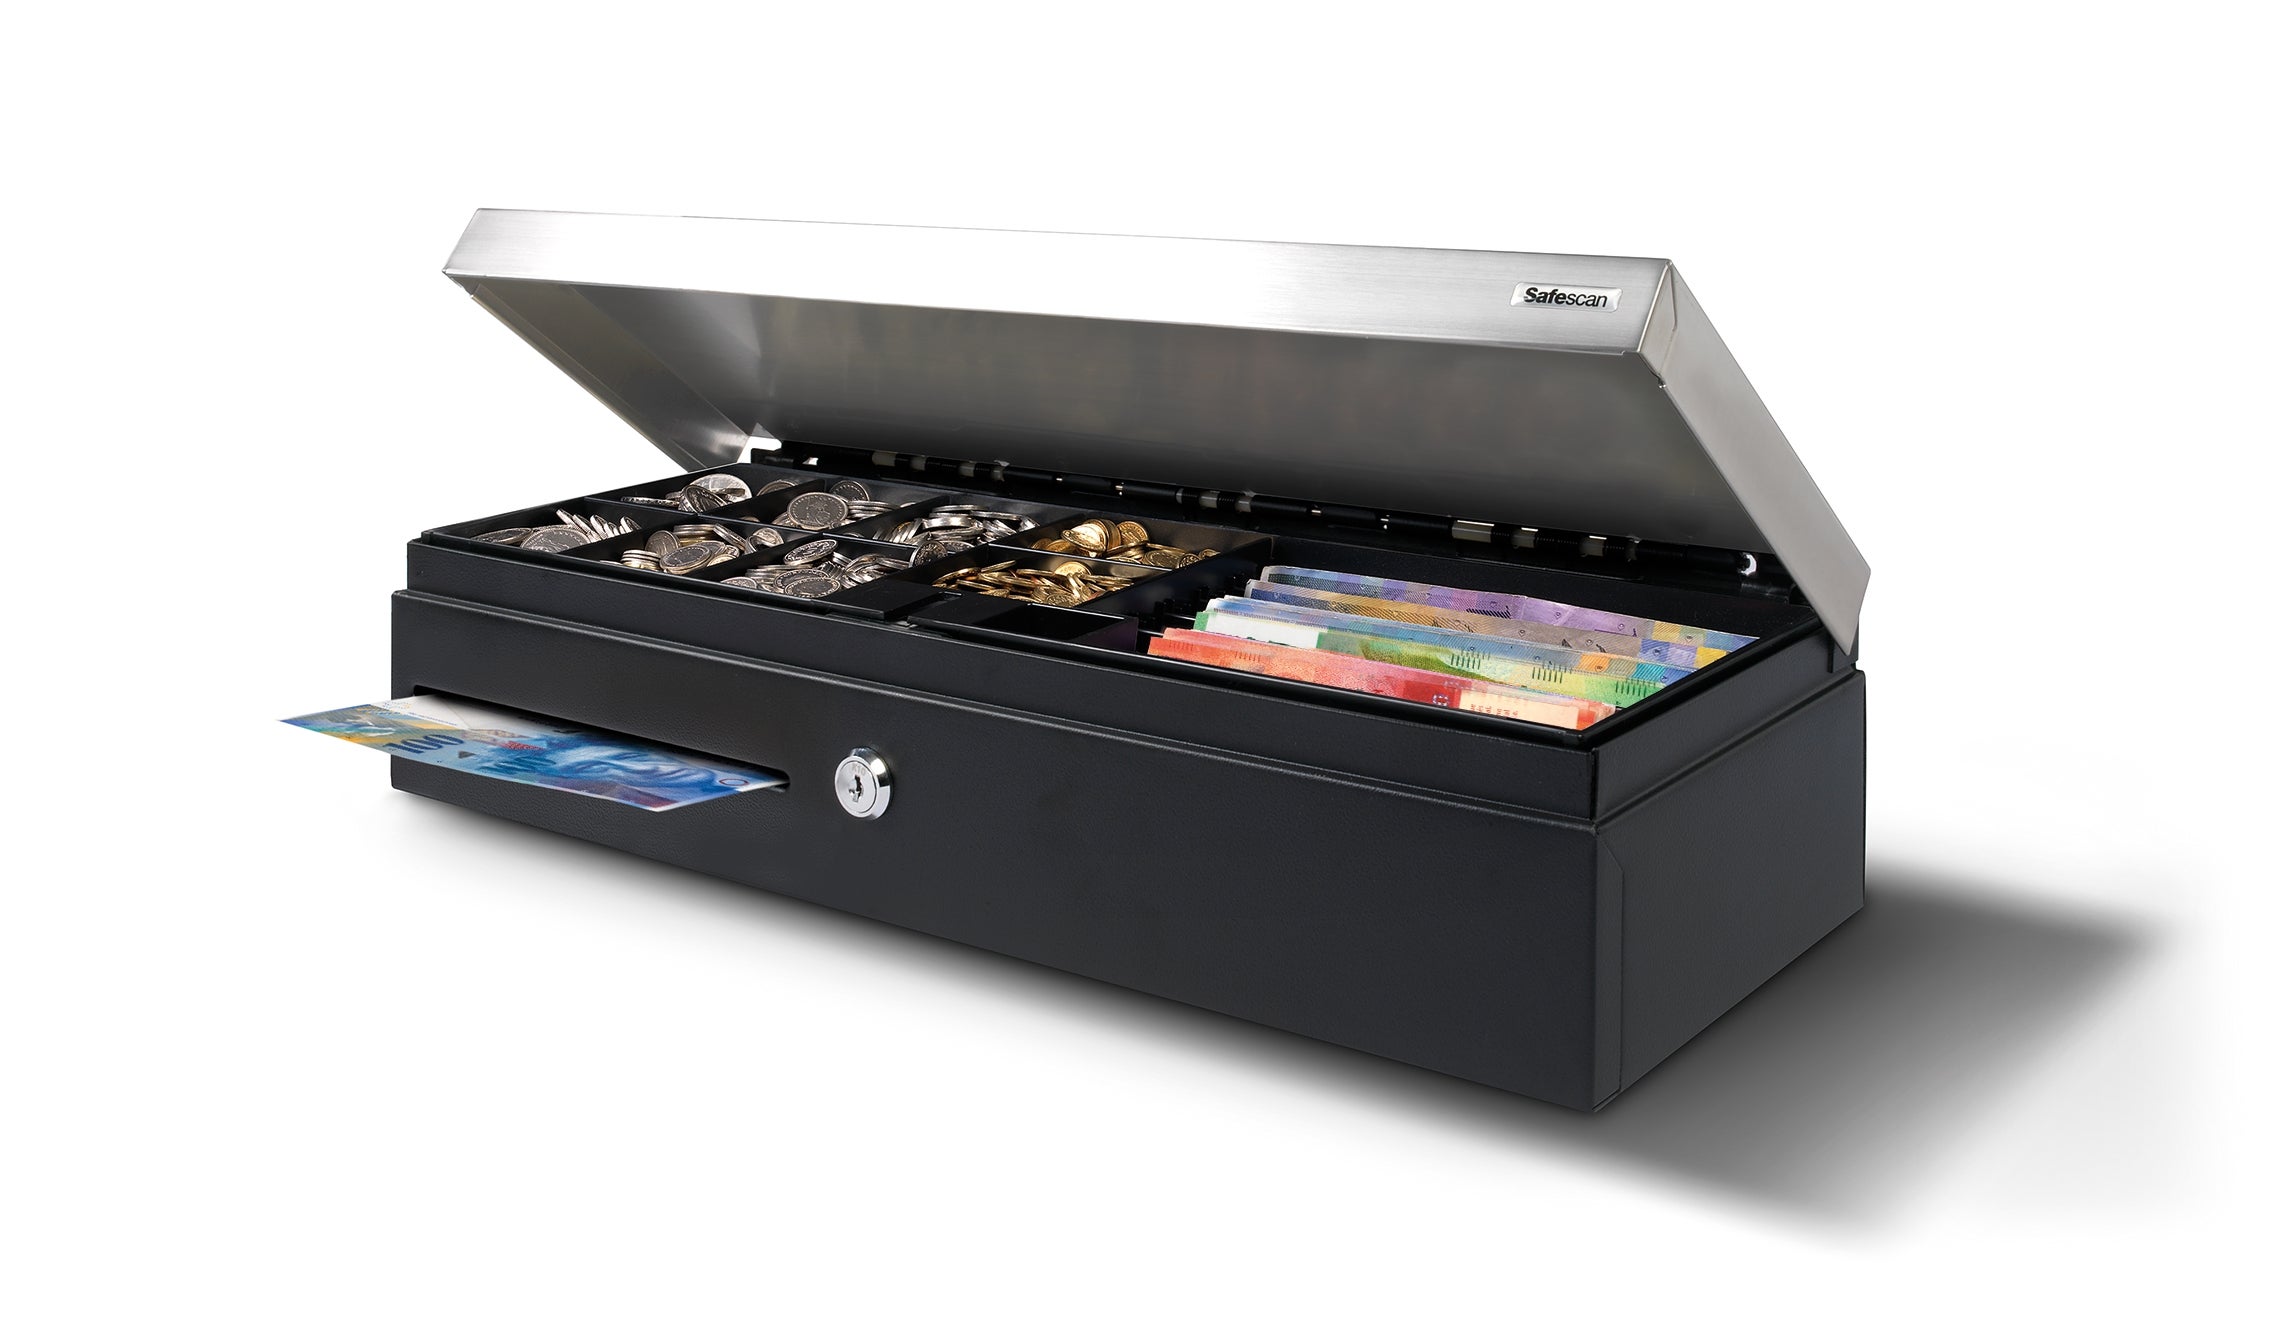 safescan-hd4617s-cash-tray-lay-out